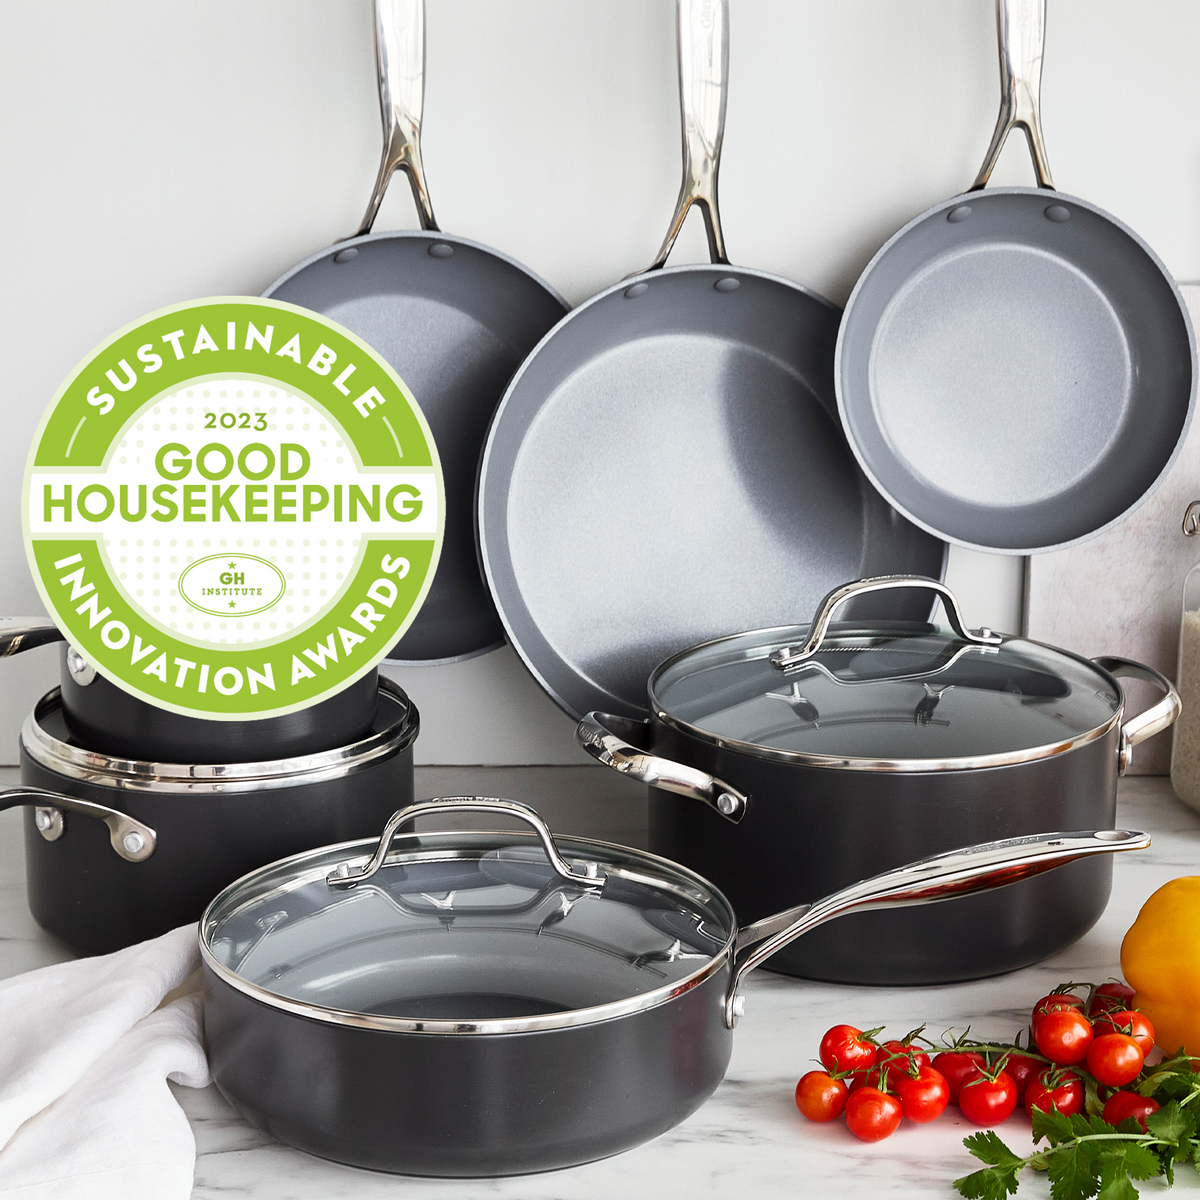 Country Kitchen 16 Piece Pots and Pans Set - Safe Nonstick Ceramic Coating  Kitchen Cookware with Soft Touch Wooden Removable Handle, RV Cookware Set